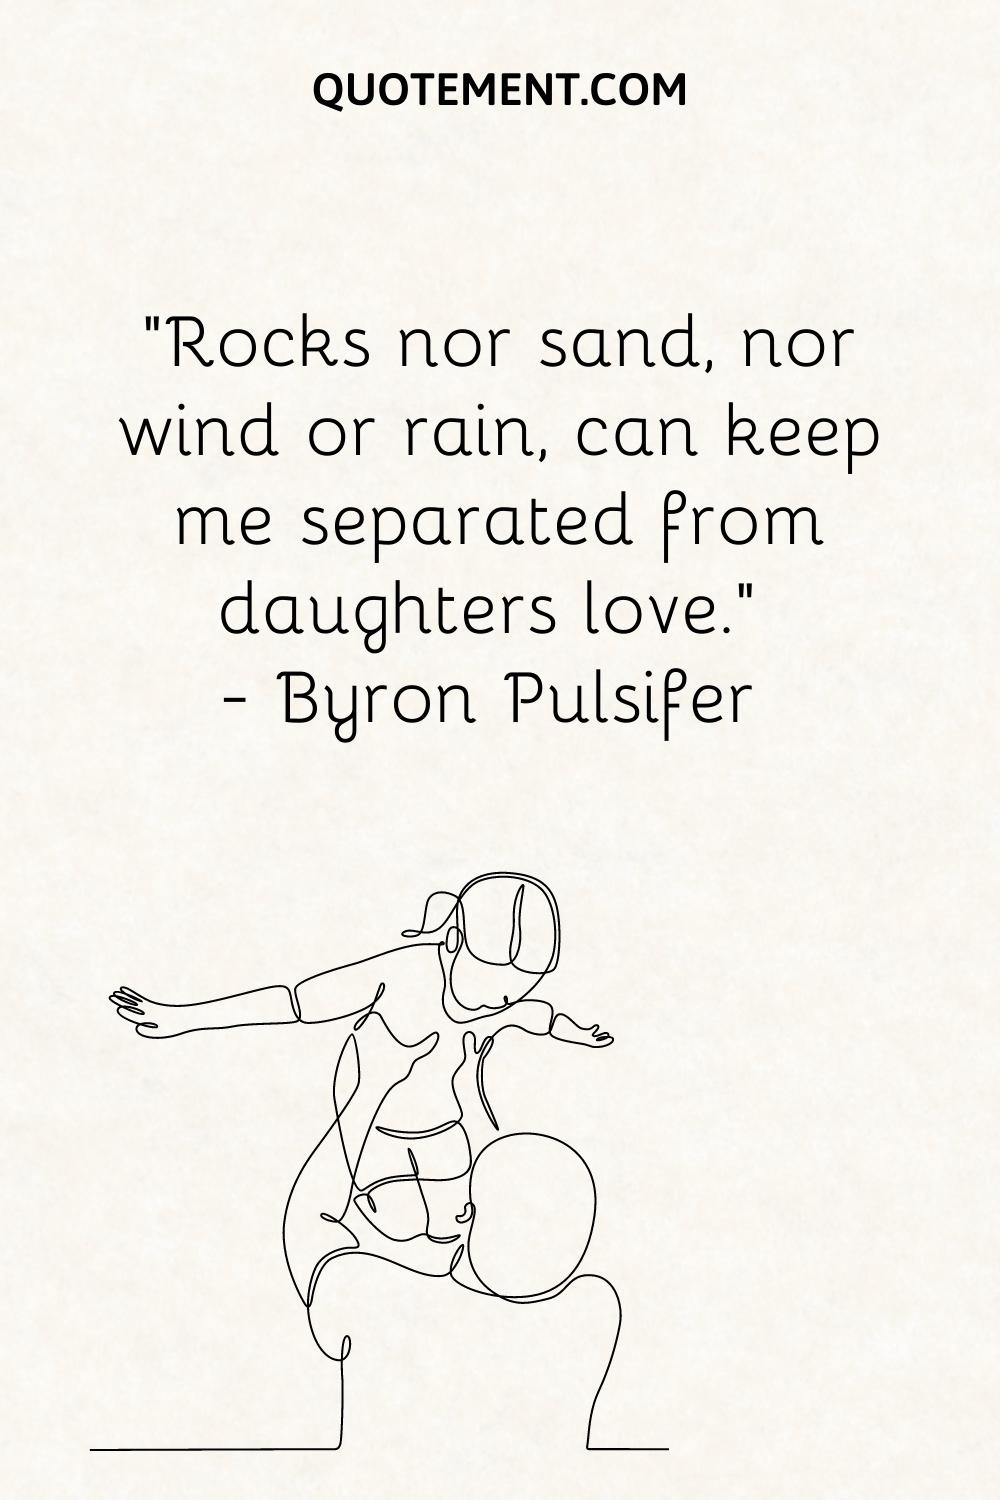 “Rocks nor sand, nor wind or rain, can keep me separated from daughter’s love.” — Byron Pulsifer